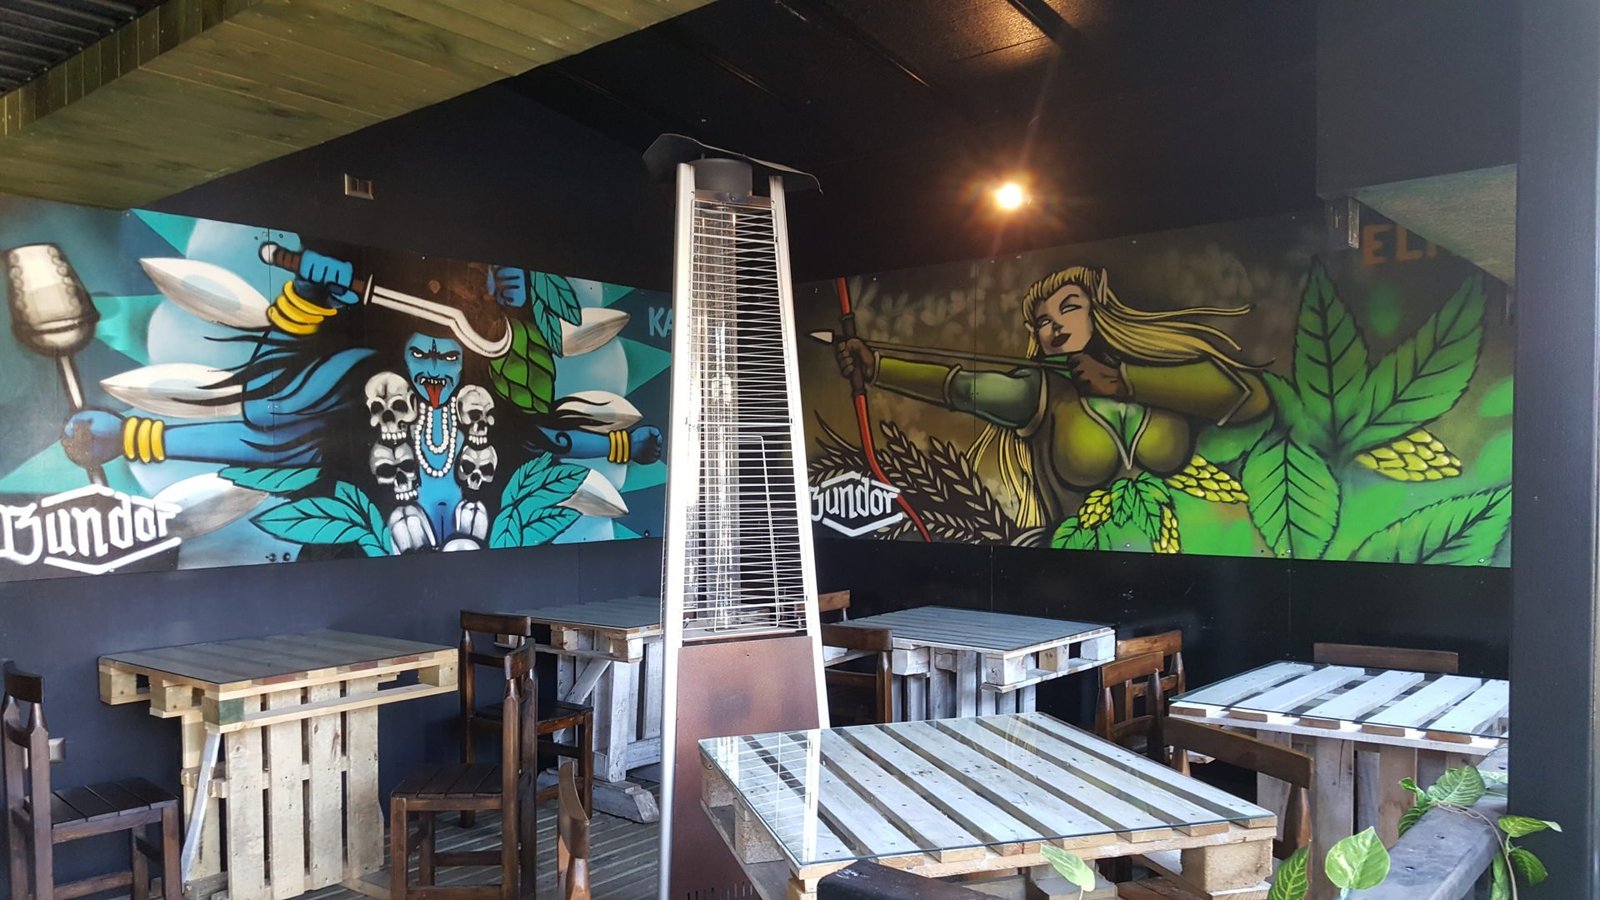 Bundor Brewery in Valdivia, Chile has some really cool artwork